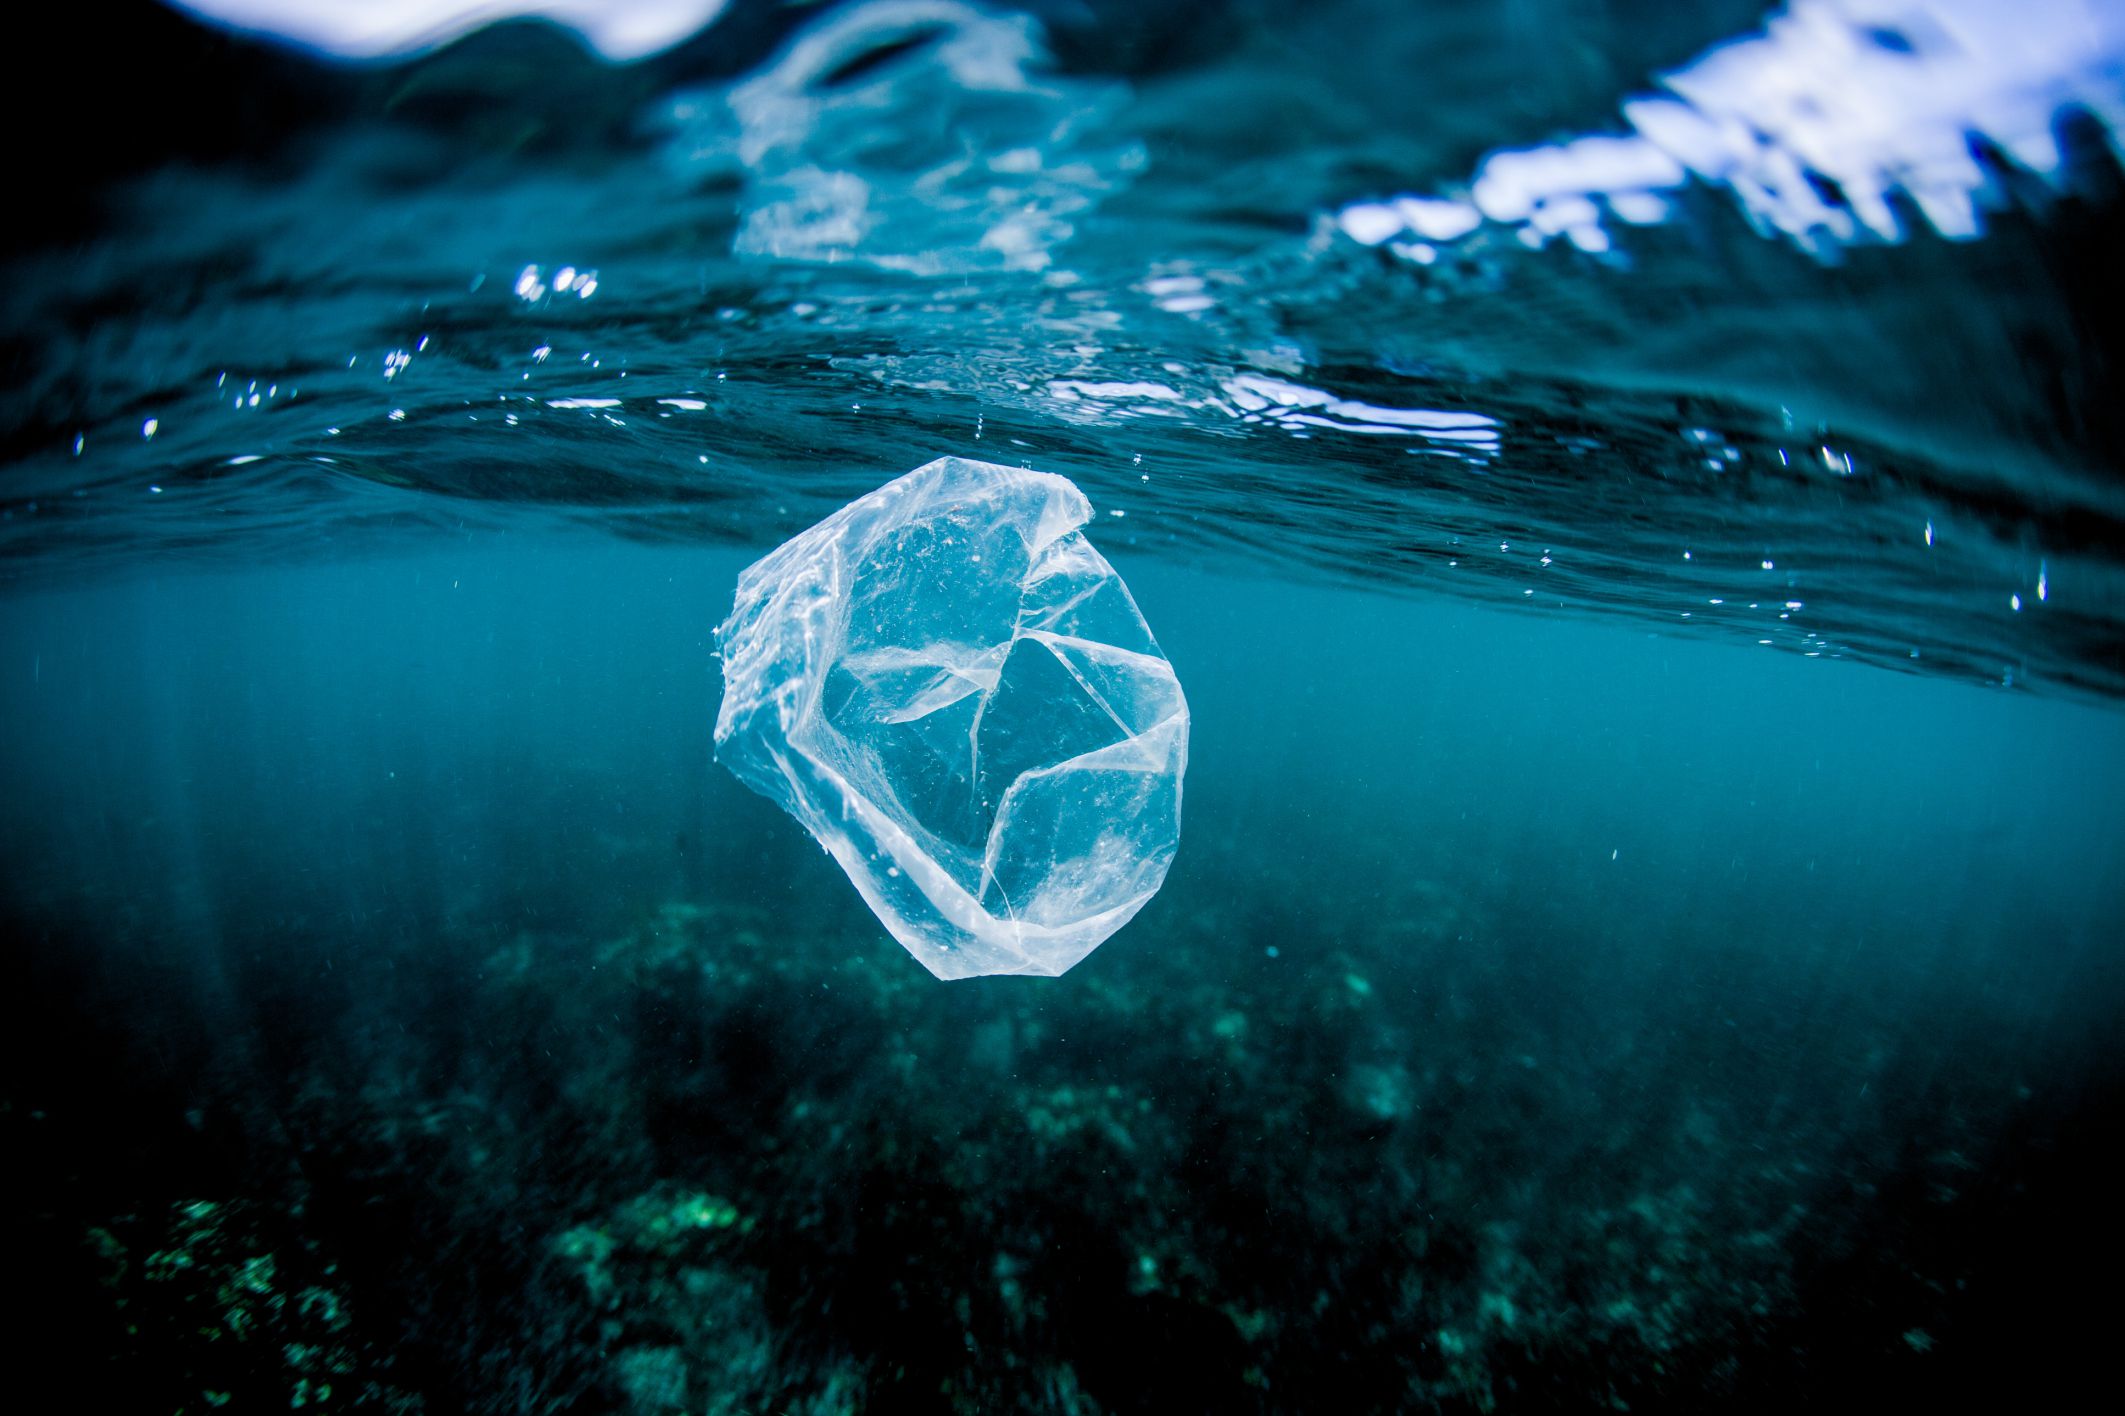 Why Should I Stop Using Plastic Bags?